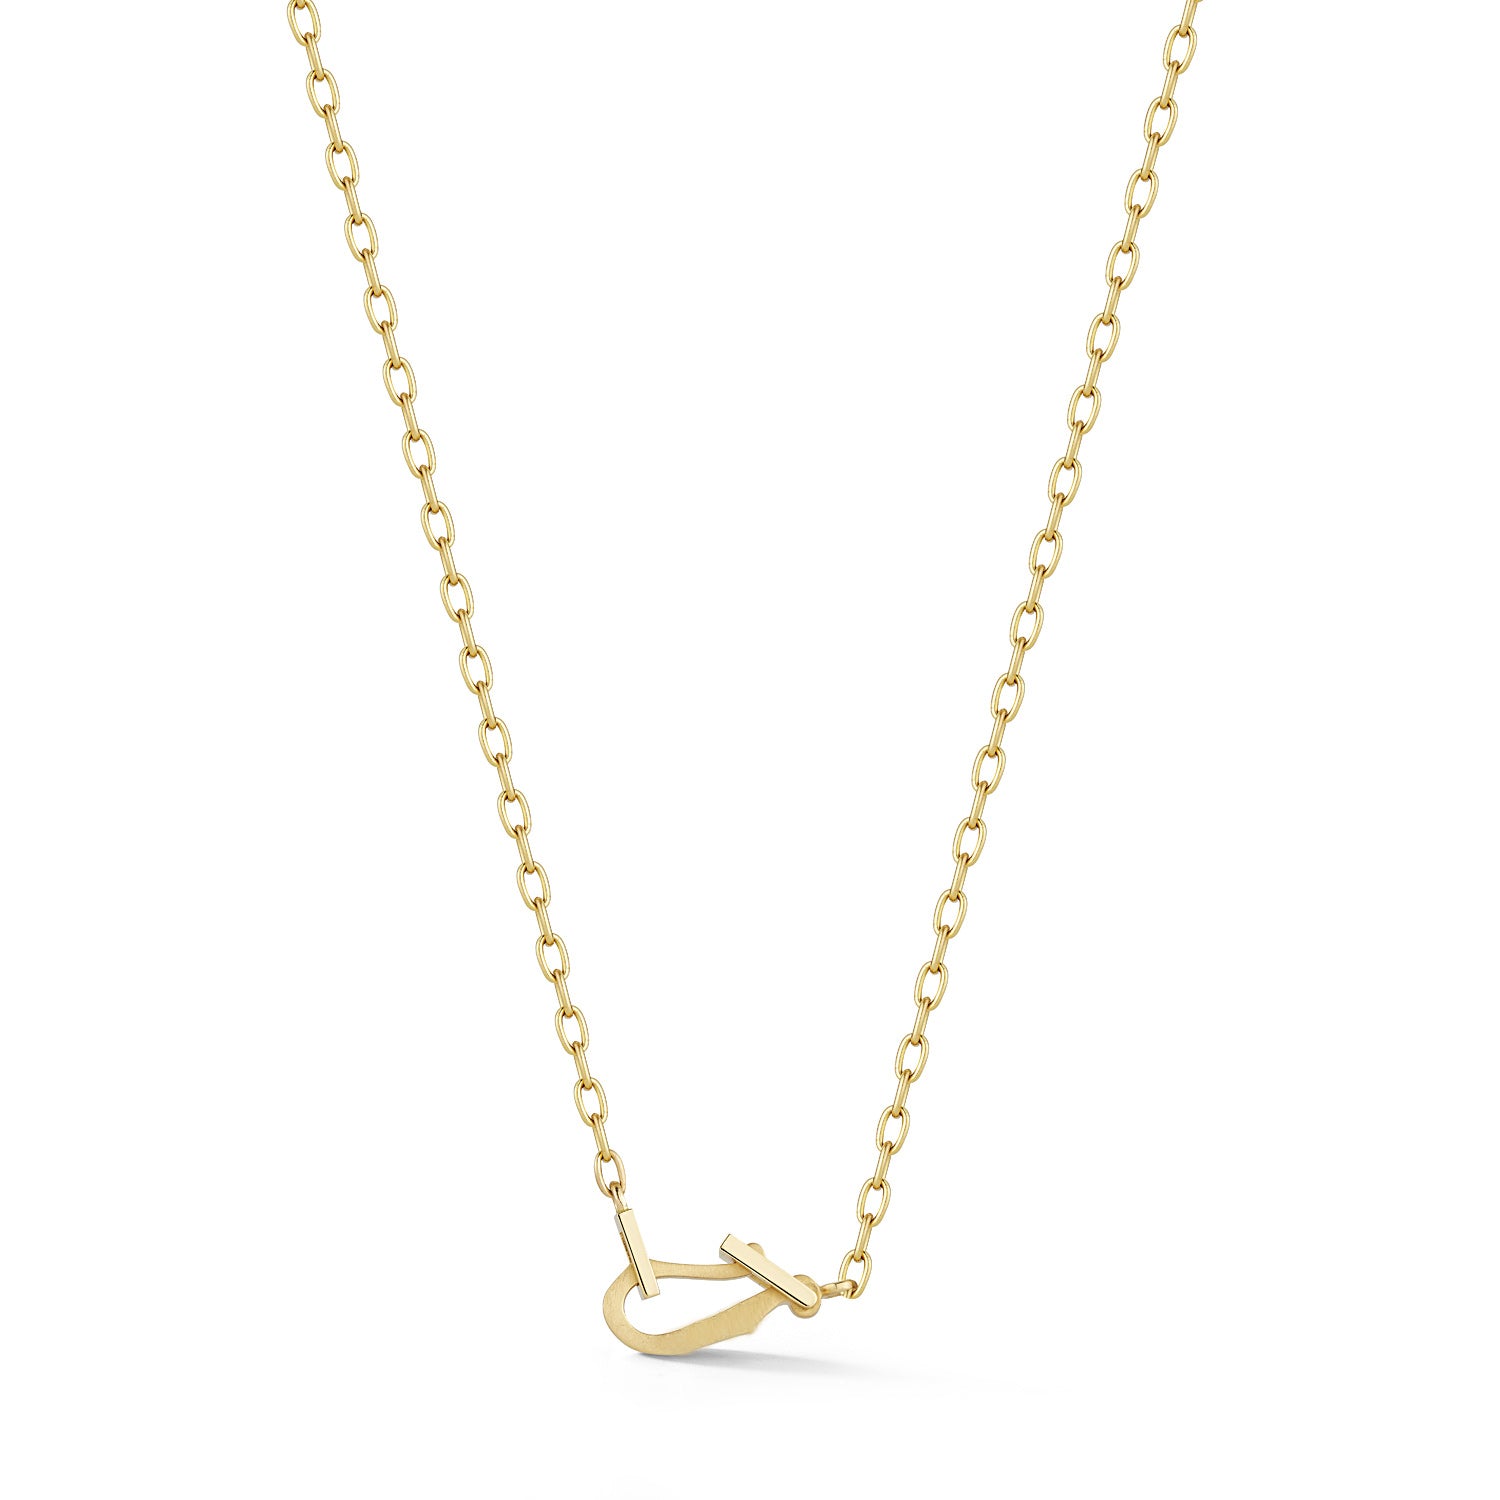 Mini Lola Necklace in 18K Yellow Gold